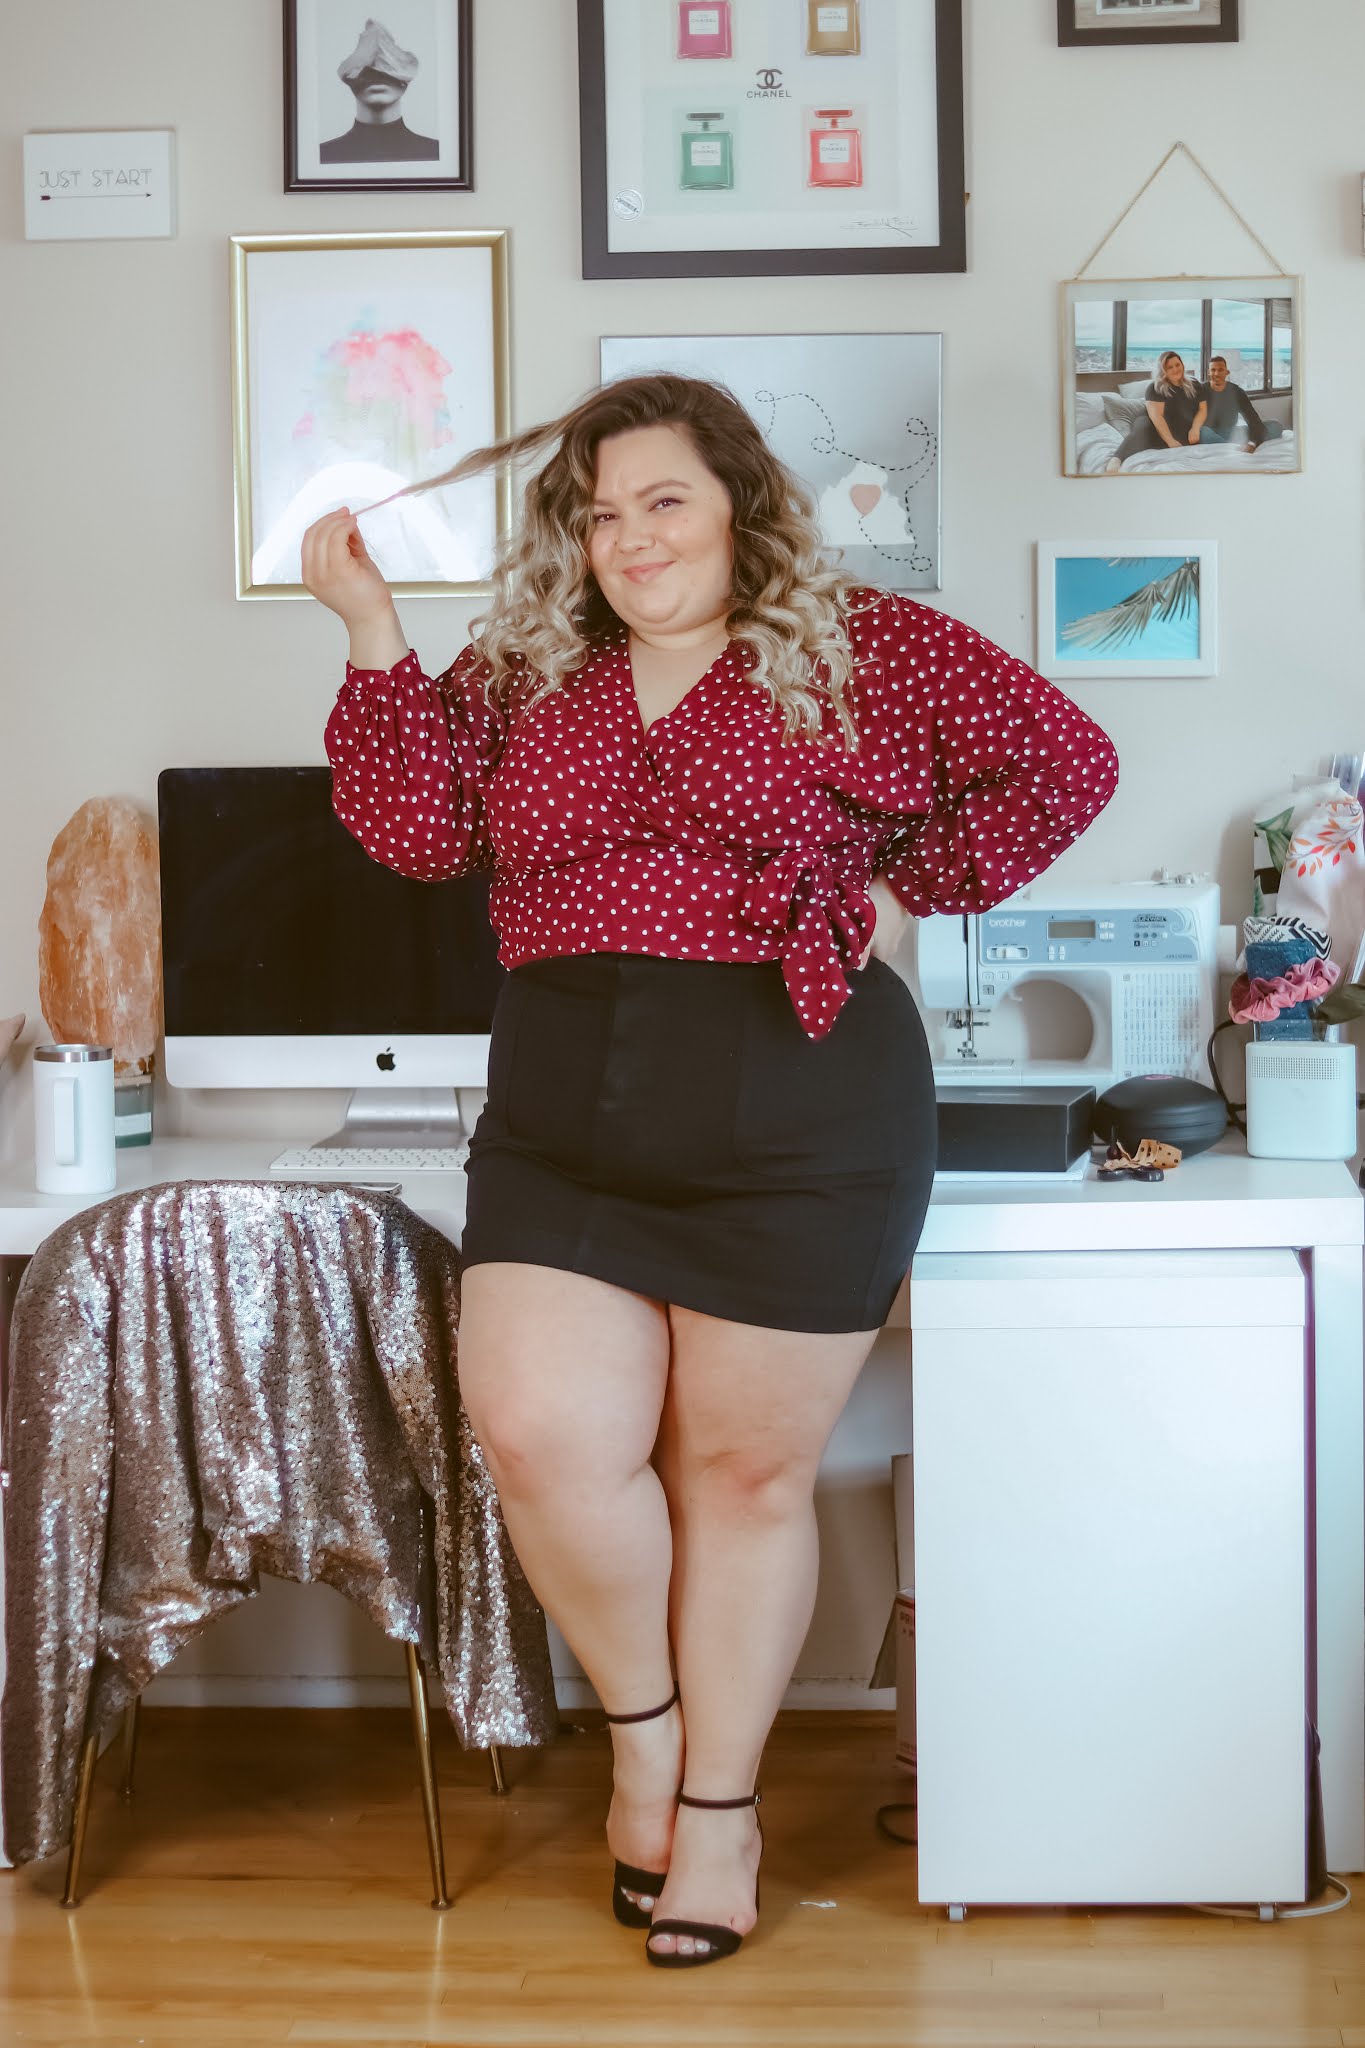 Chicago Plus Size Petite Fashion Blogger, influencer, YouTuber, and model Natalie in the City shares her latest work from home outfit.